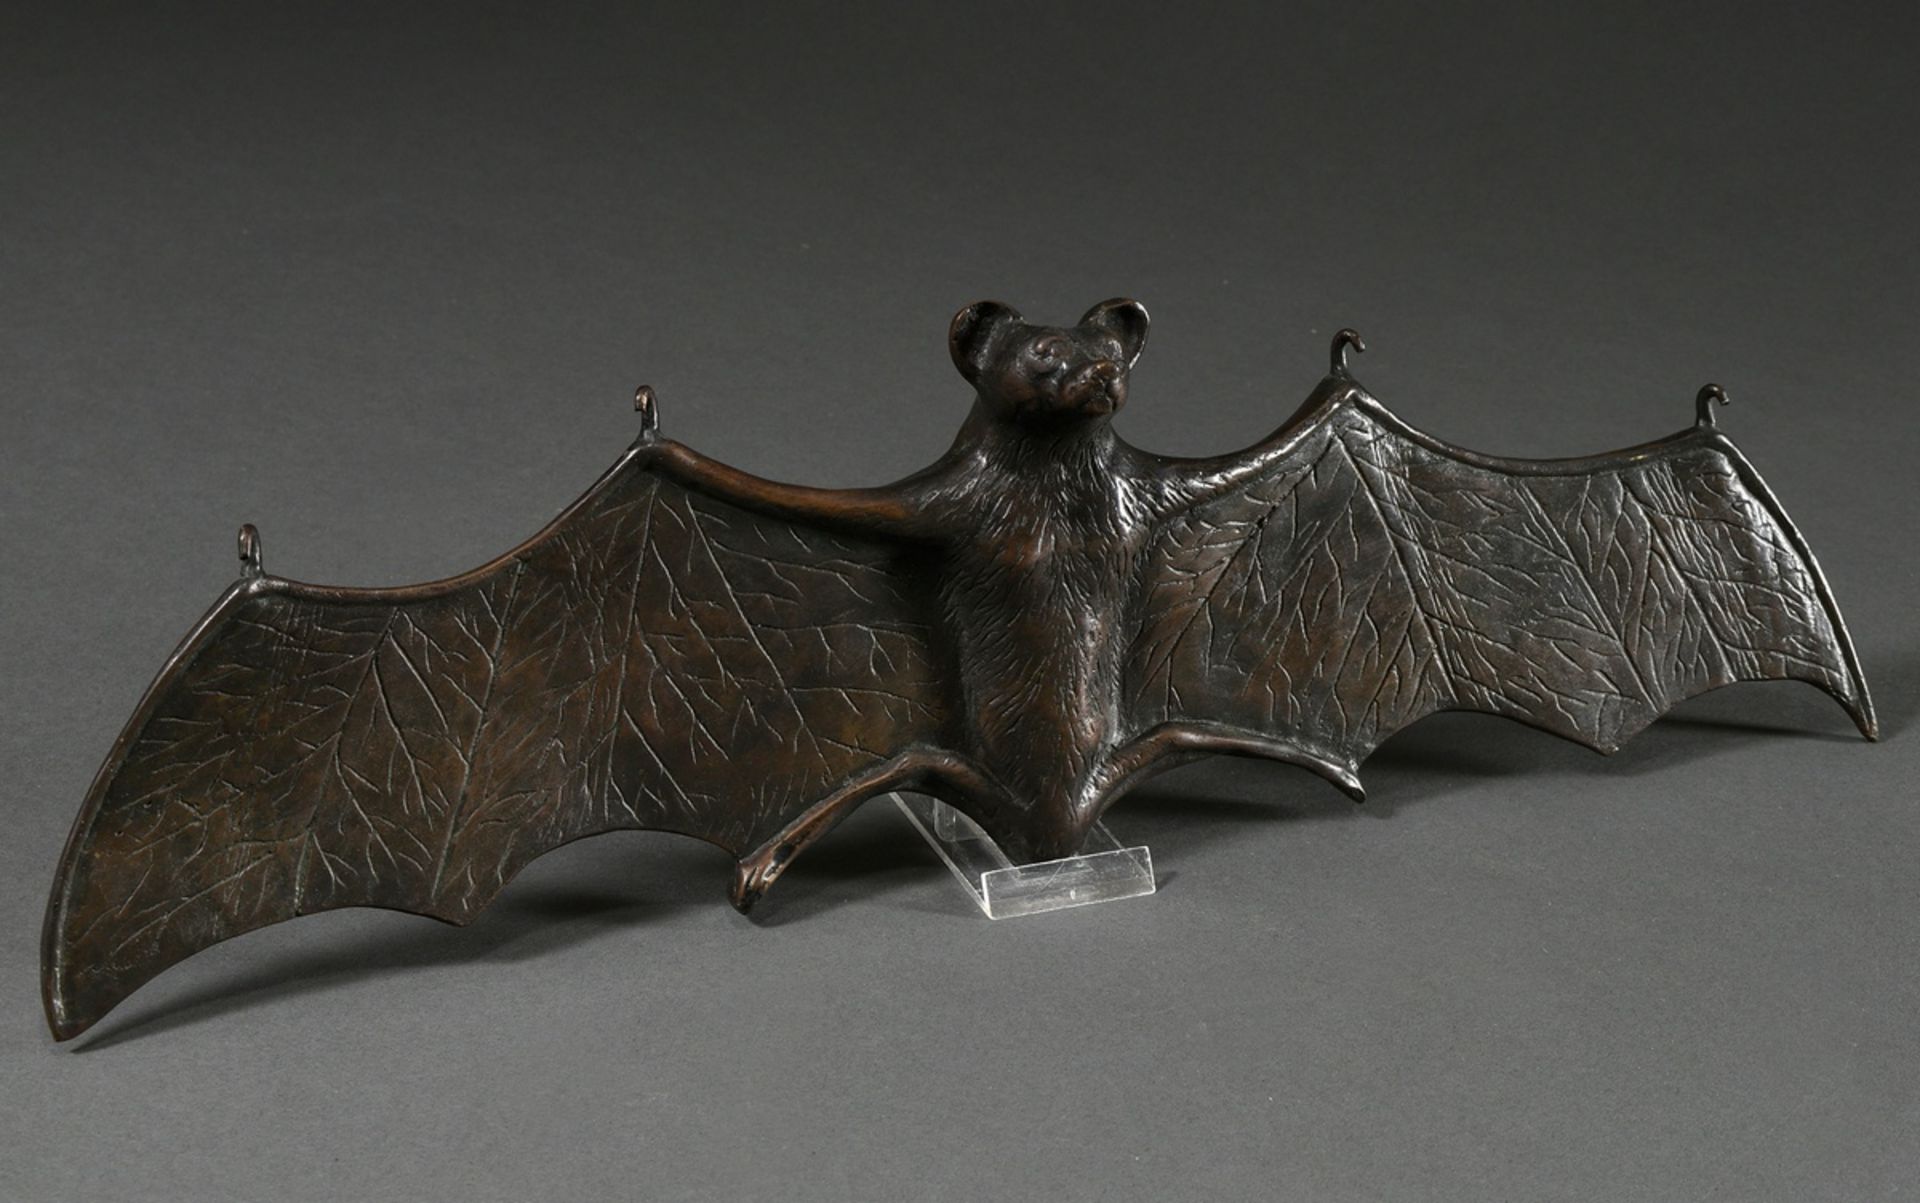 Large bronze "Bat" with outstretched wings and claw hook, c. 1900, w. 45.6cm